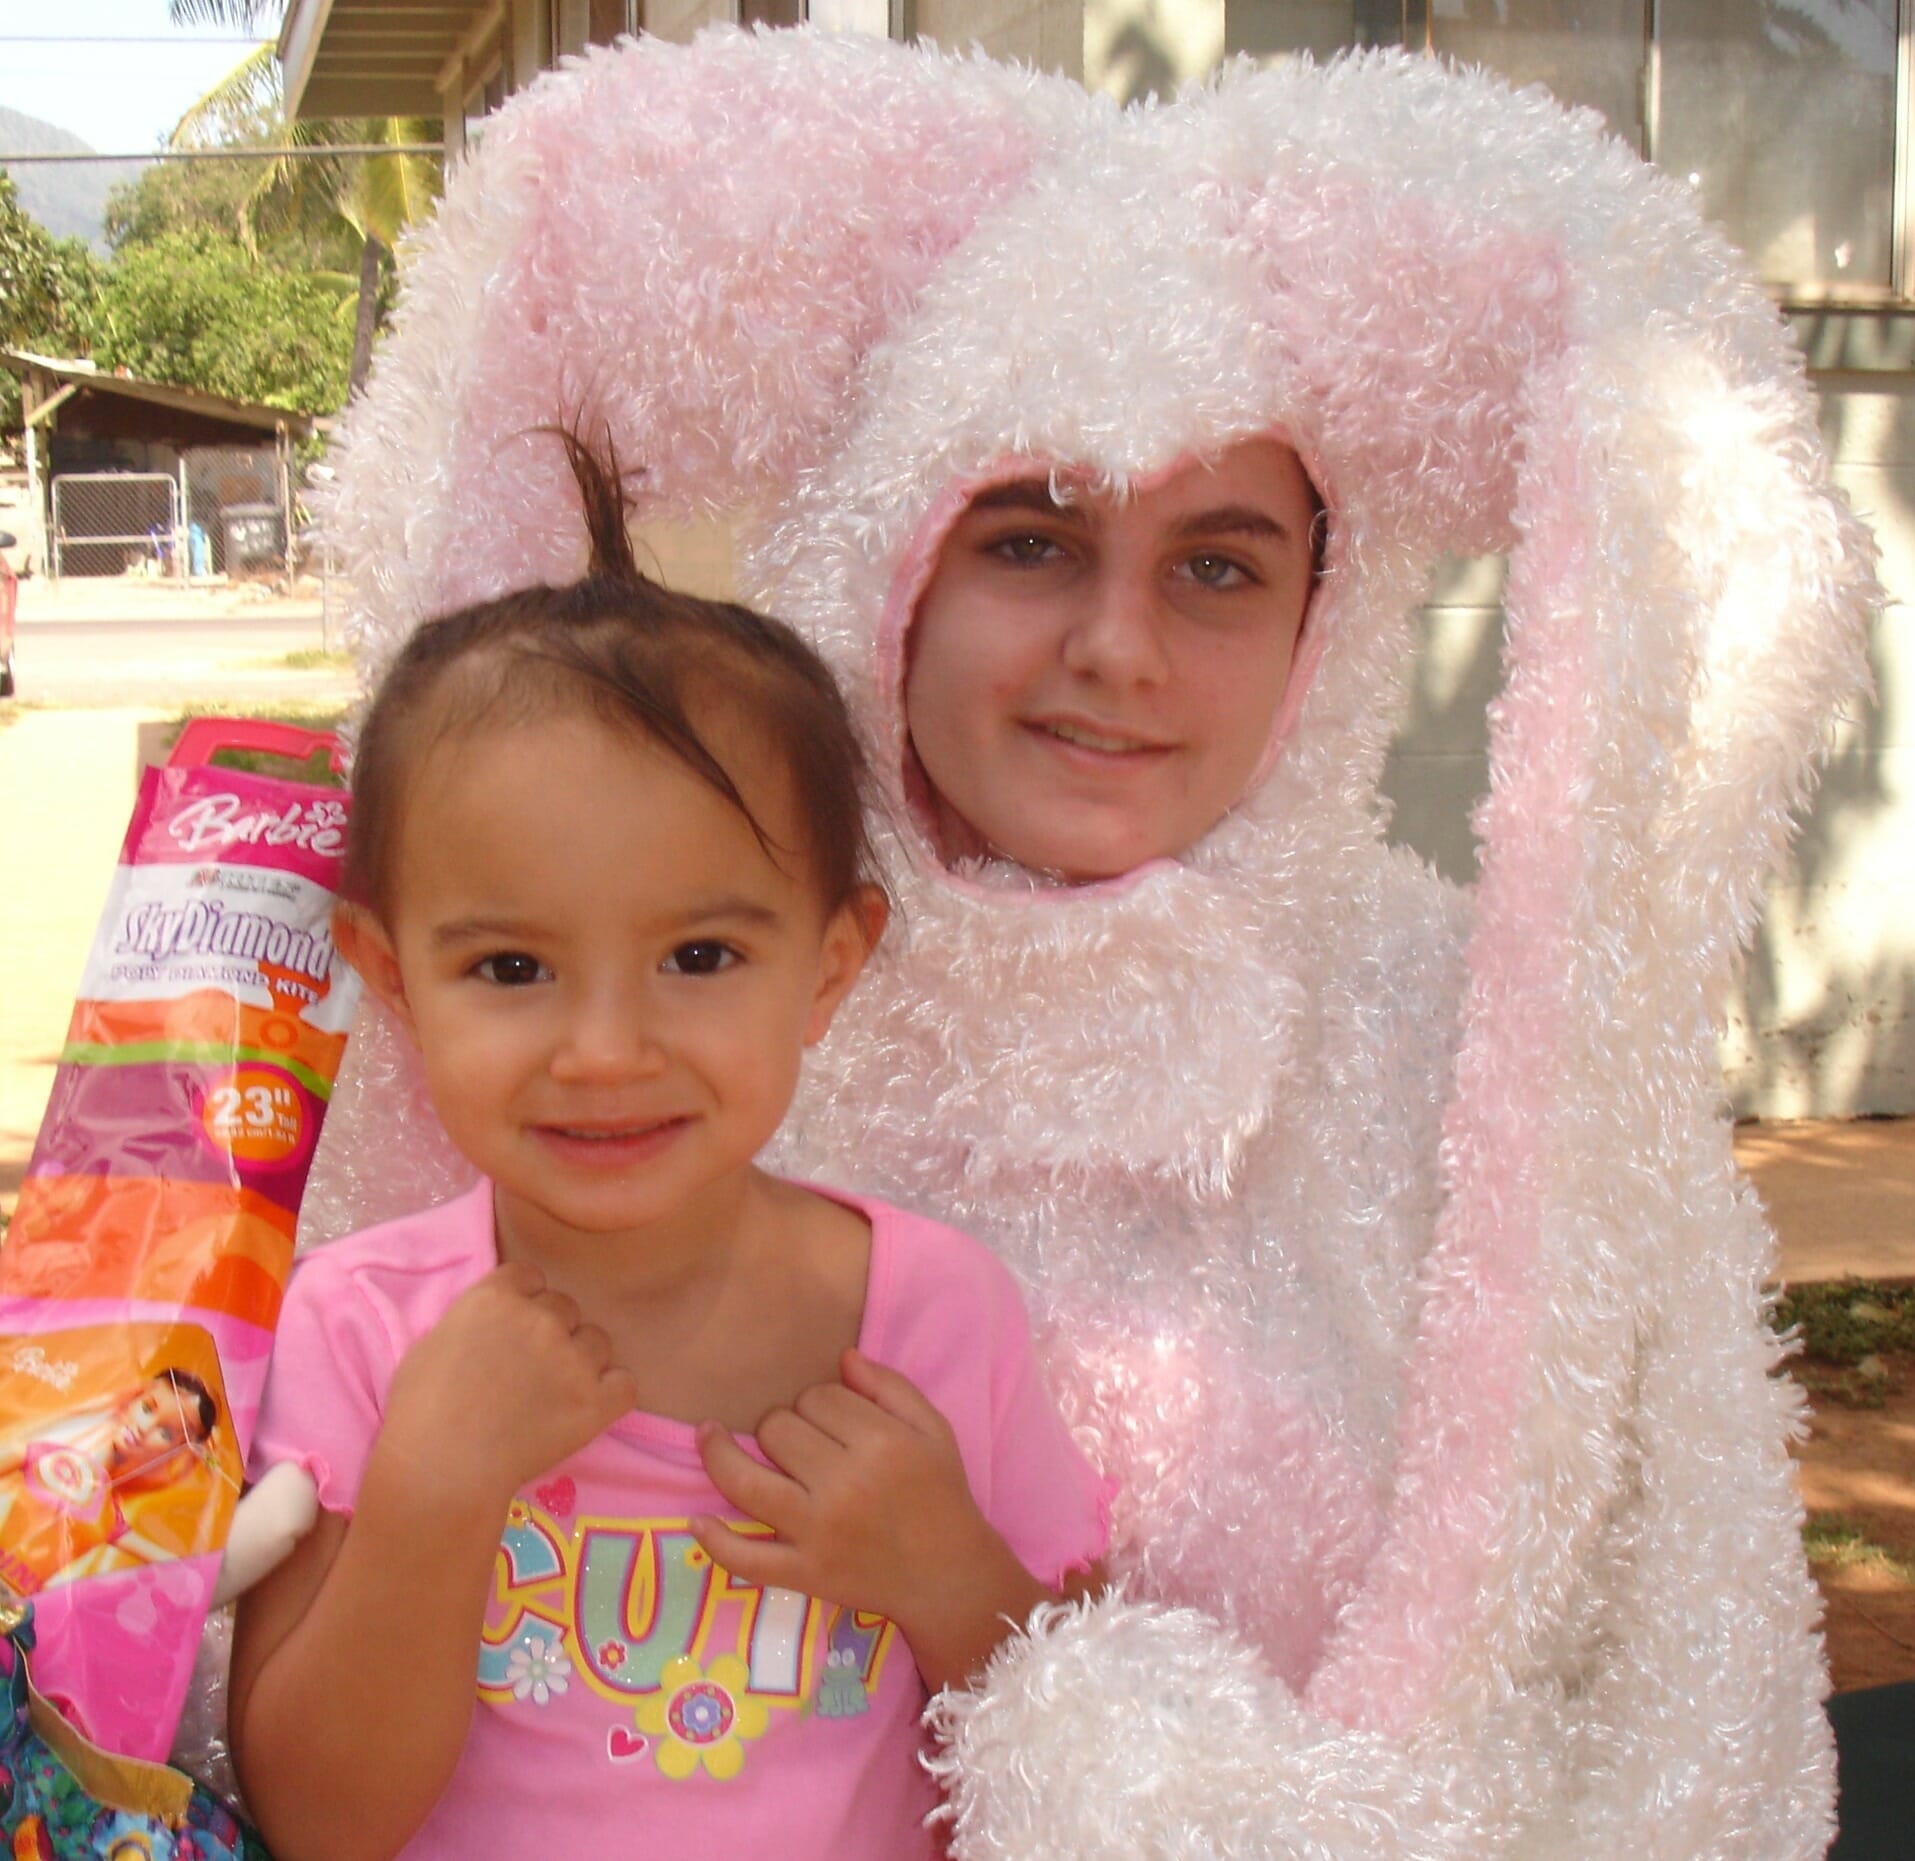 An adult dressed as the Easter bunny poses for a photo with a young girl